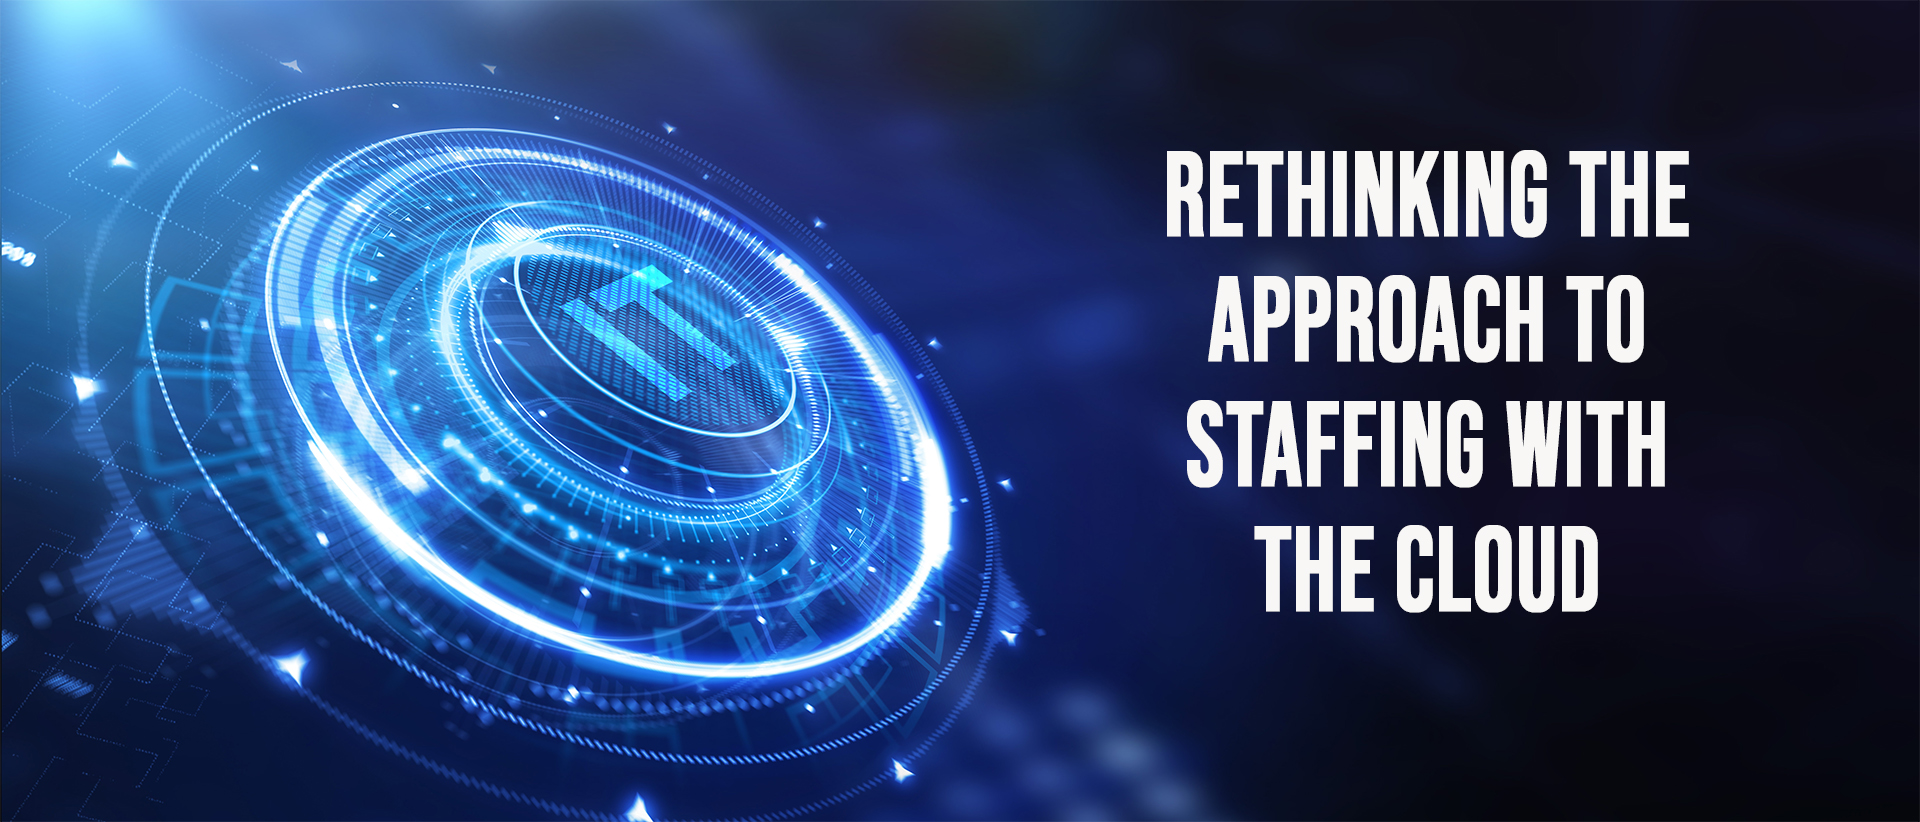 Rethinking the Approach to Staffing With the Cloud